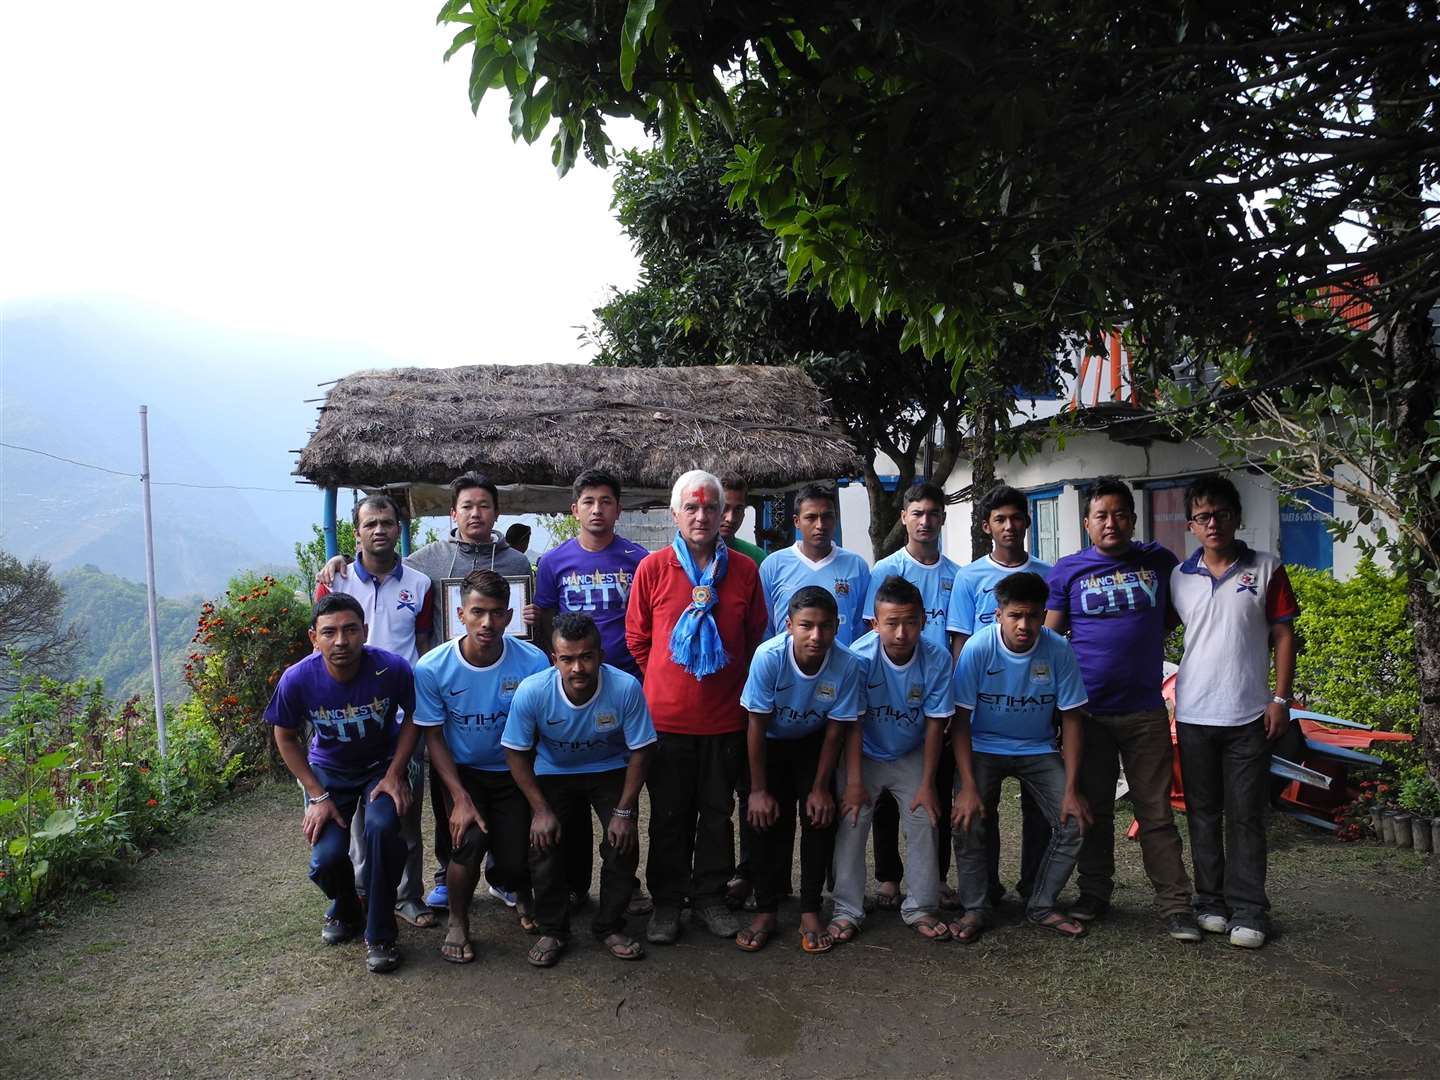 Derek with the young Nepali team in Man City shirts.